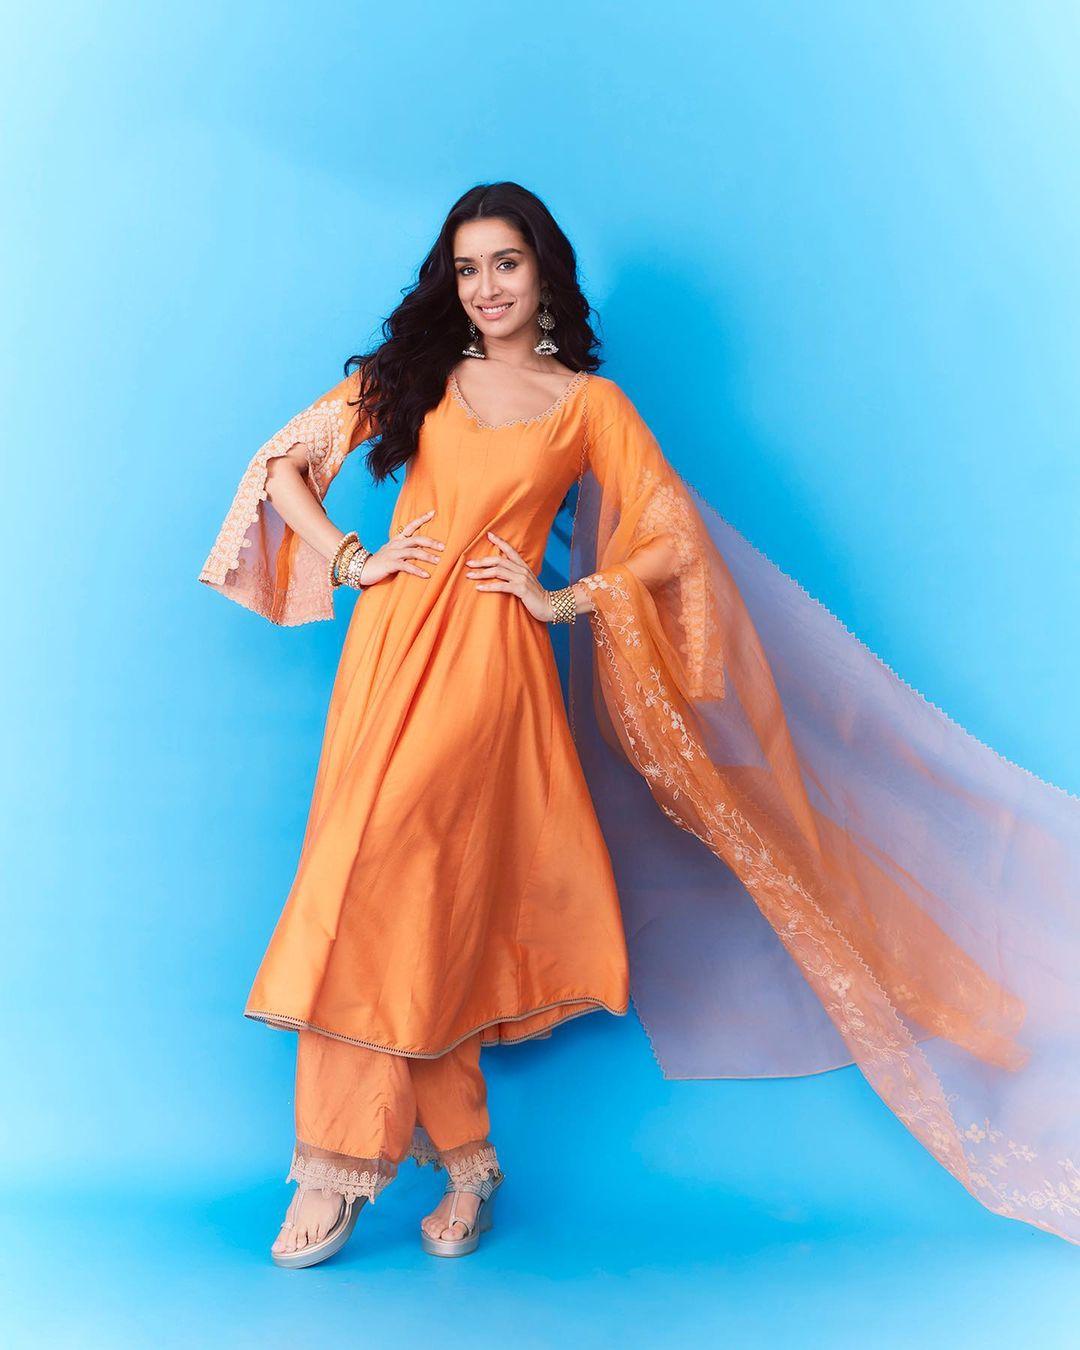 Check out this vibrant look of Shraddha Kapoor, which speaks simplicity and grace. In this look, Shraddha wore a stunning orange suit with fancy sleeves and paired it with matching pants and a sheer dupatta